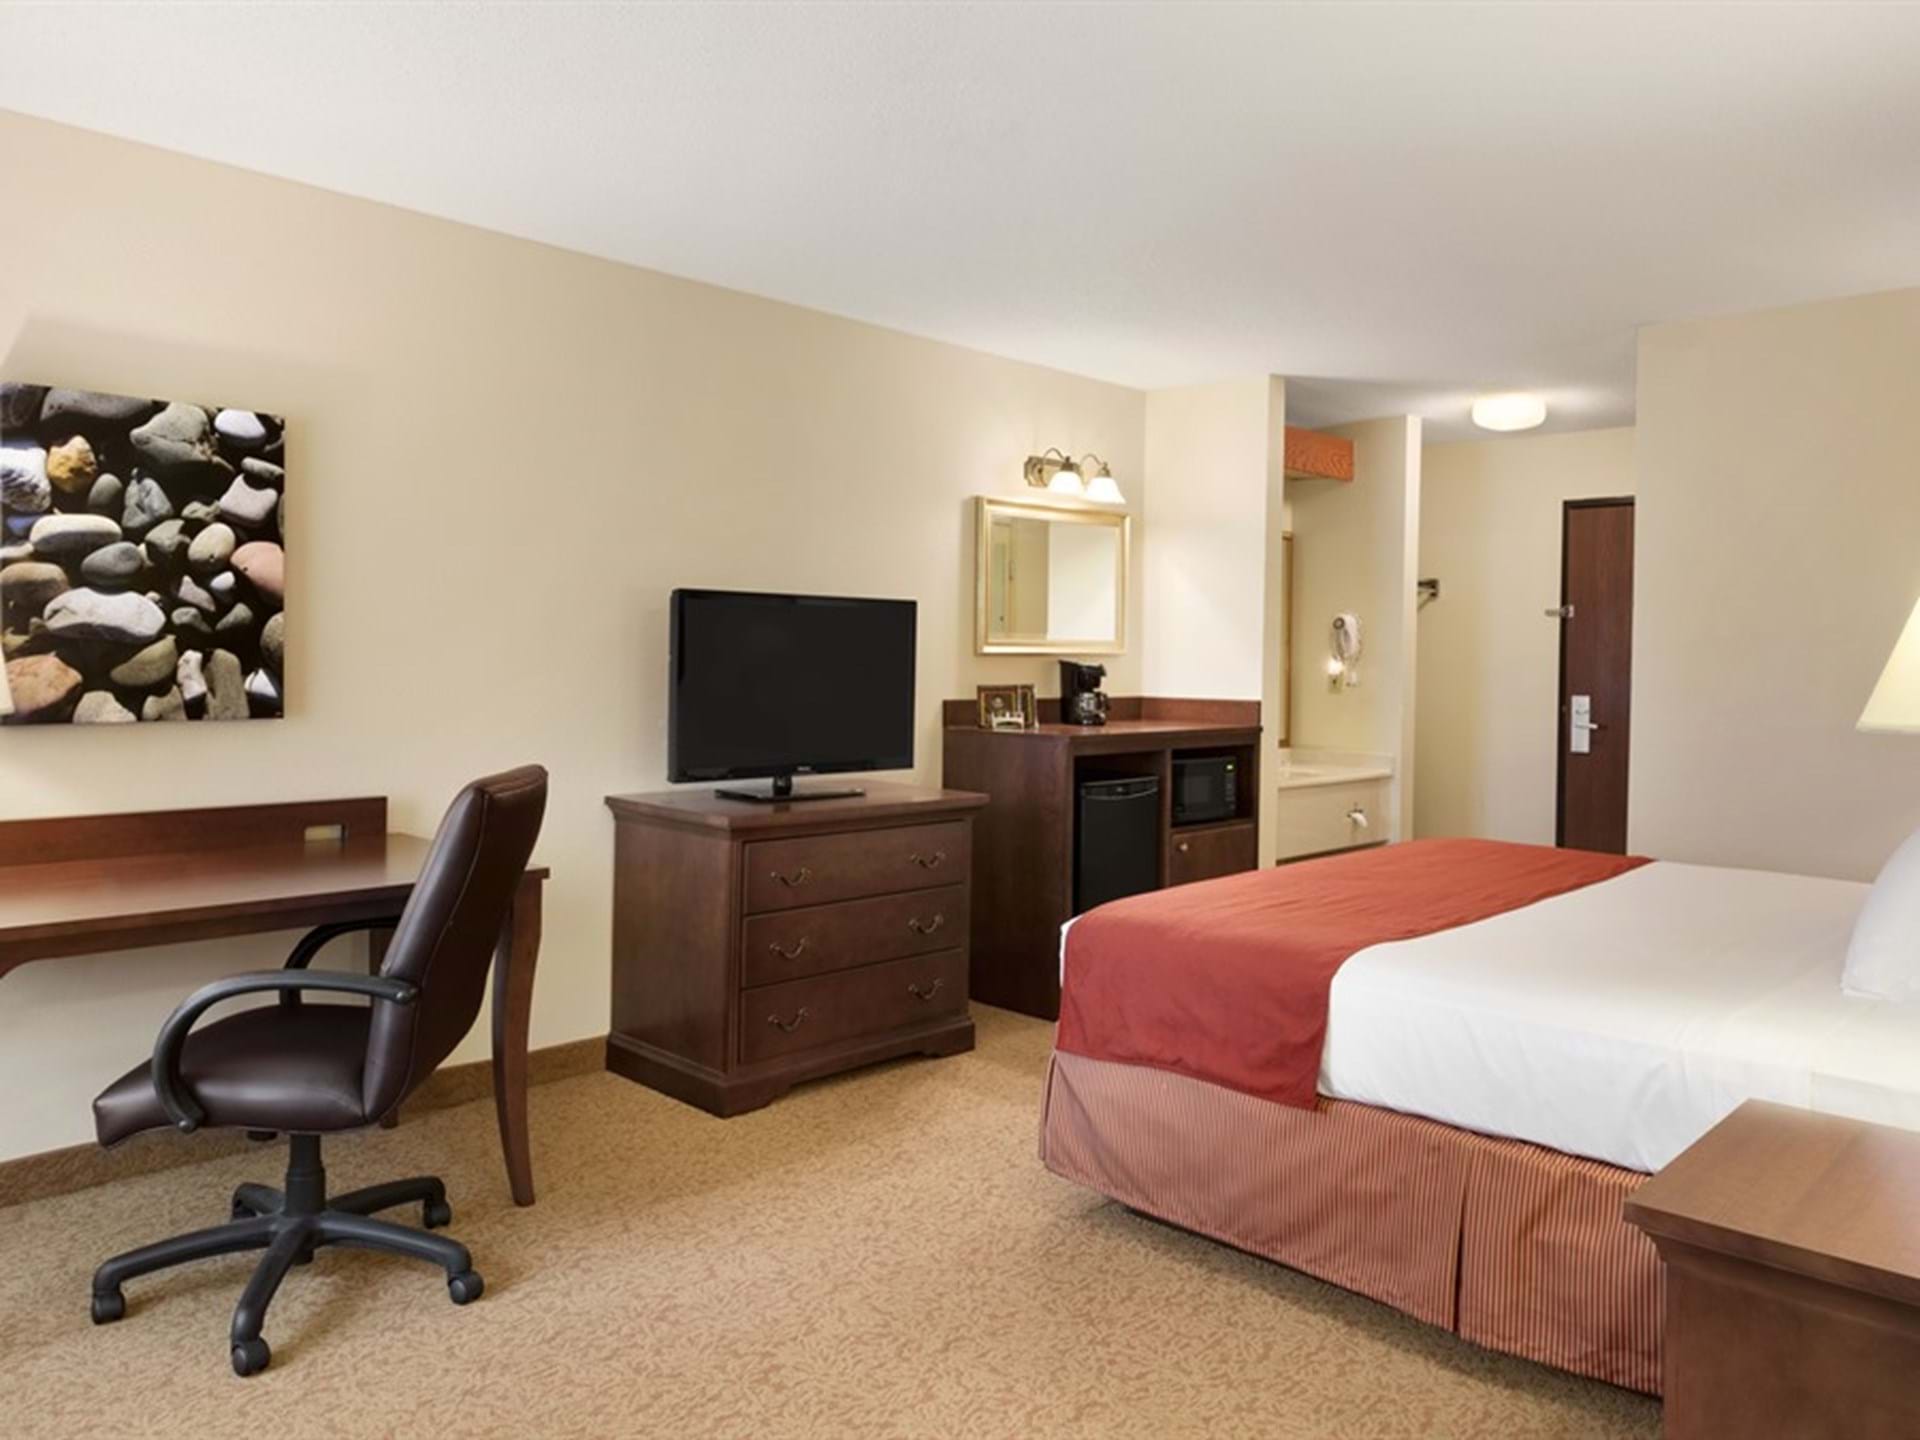 2. Newly Renovated Guest rooms